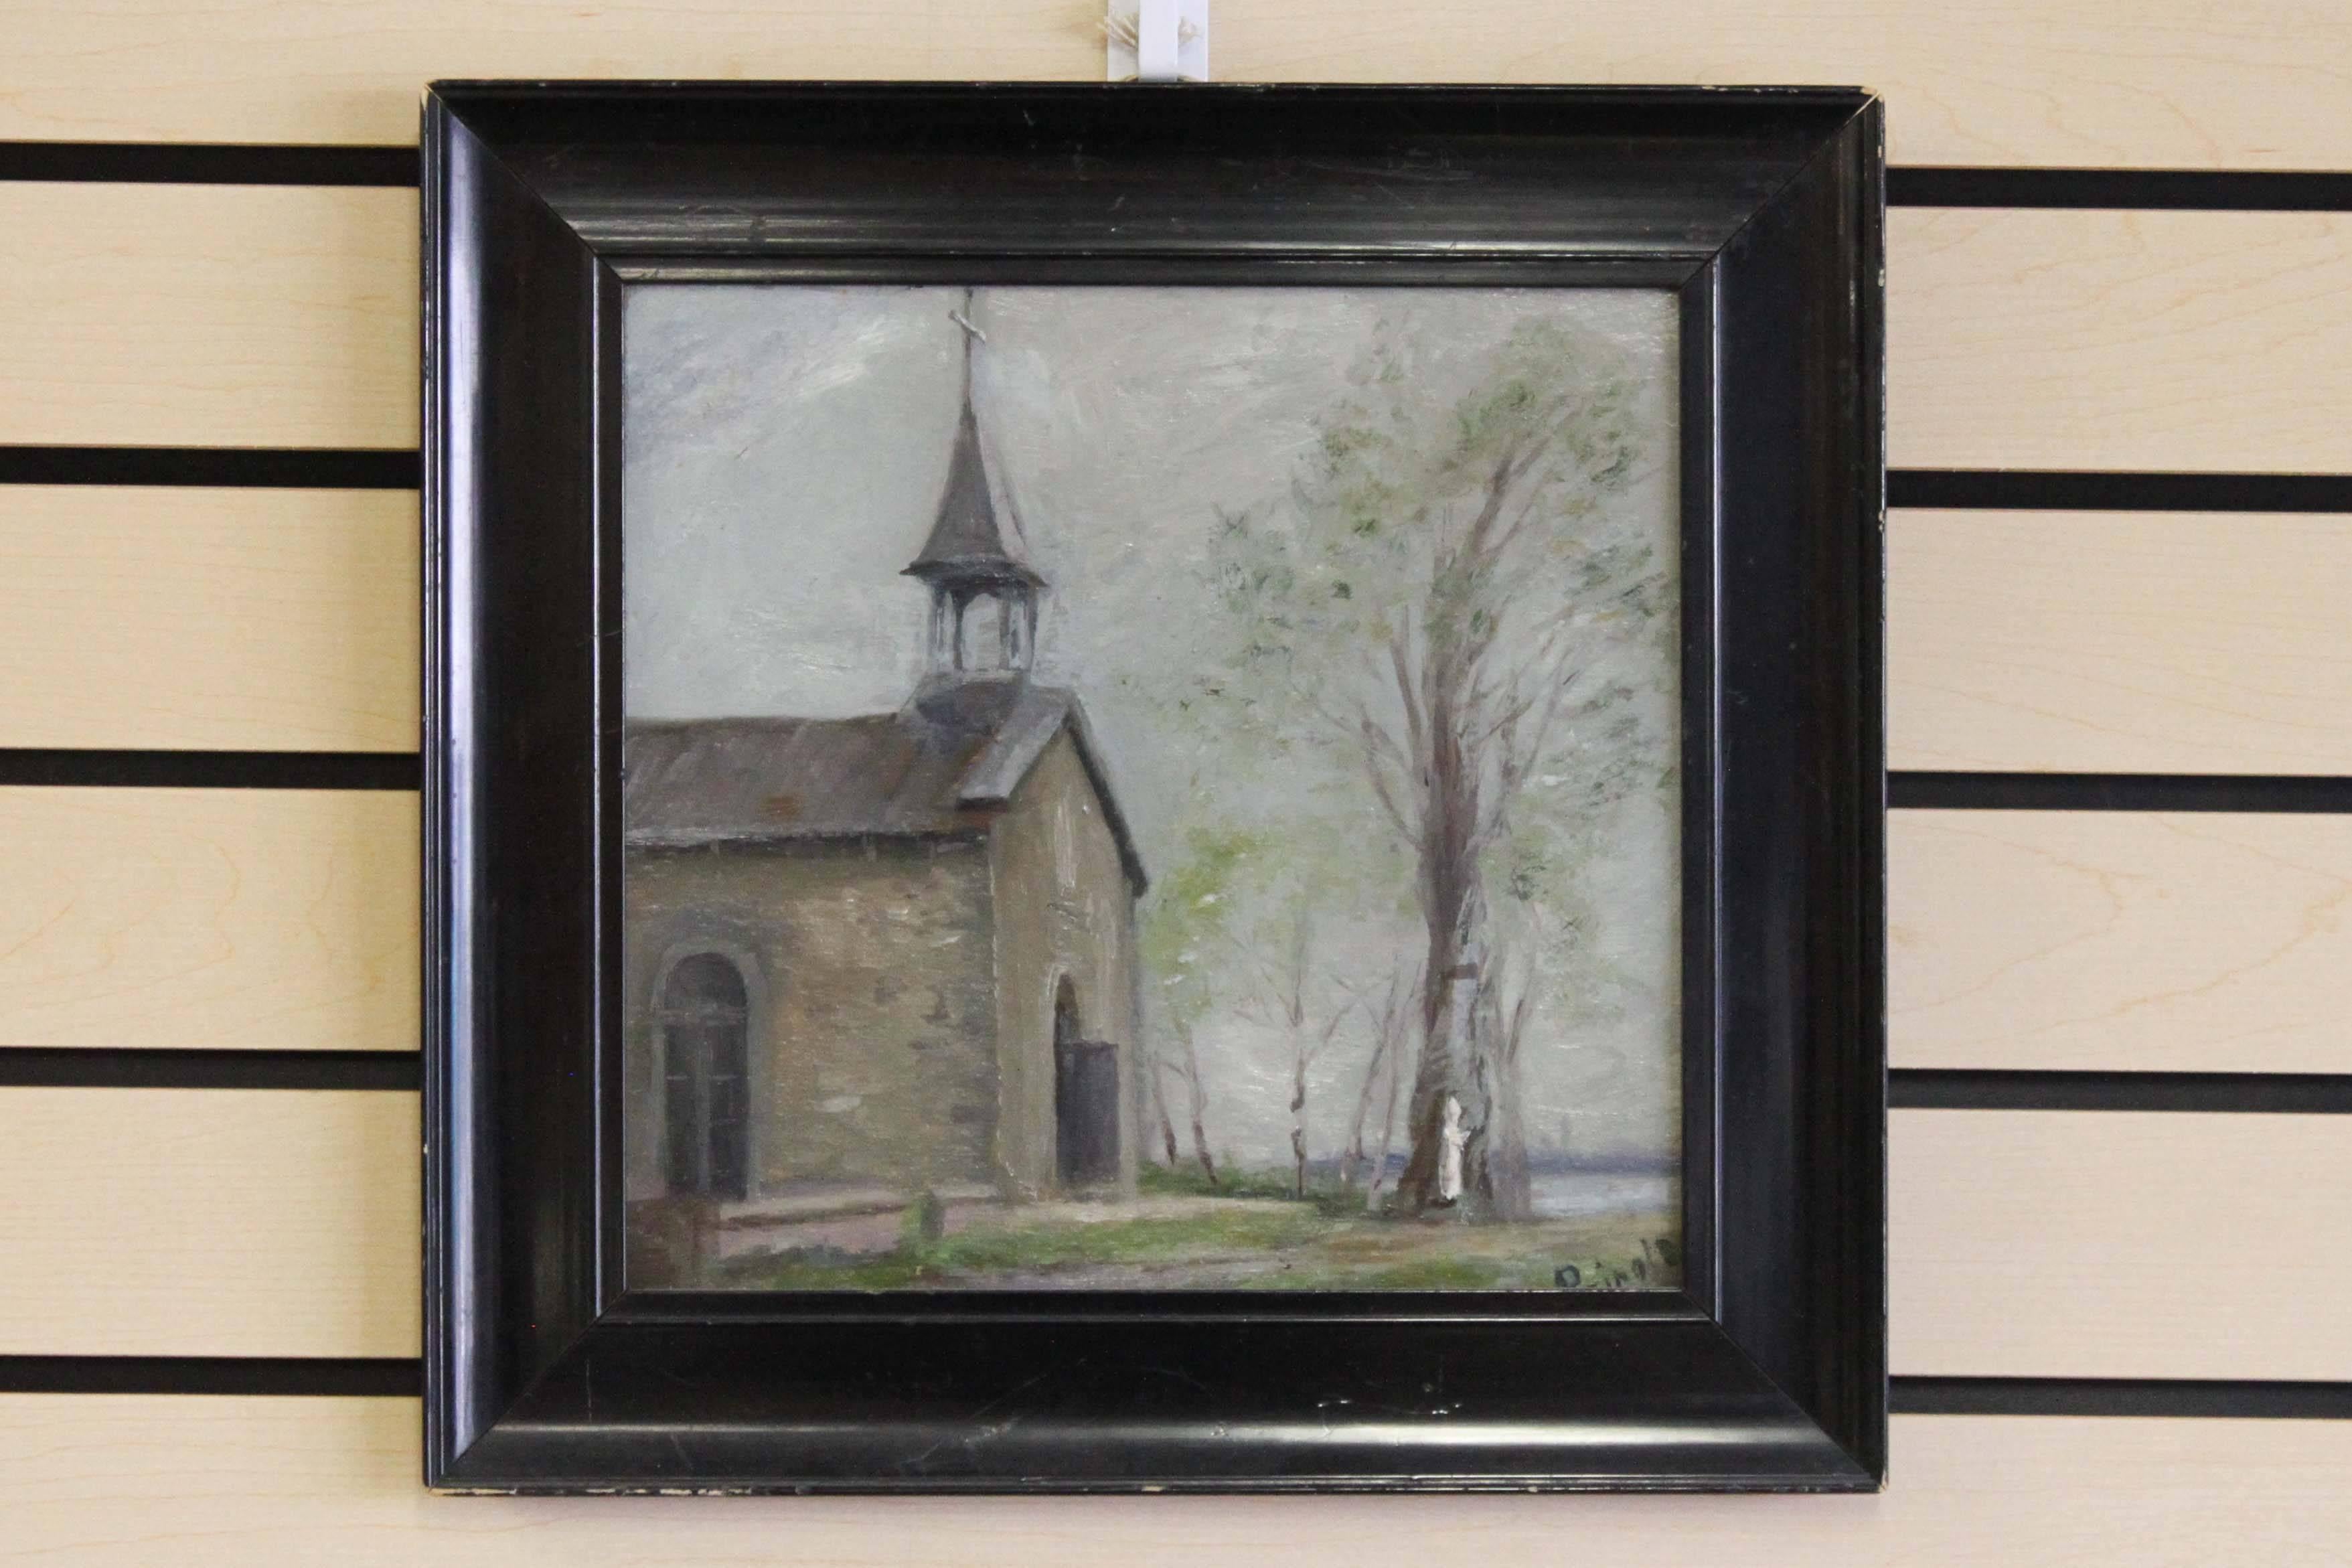 'A Country Church' by Annie Pringle (1867-1945), Canadian. An oil on board of a country church in Eastern Canada. In original ebonized frame. Signed bottom right, measurements are of board.
